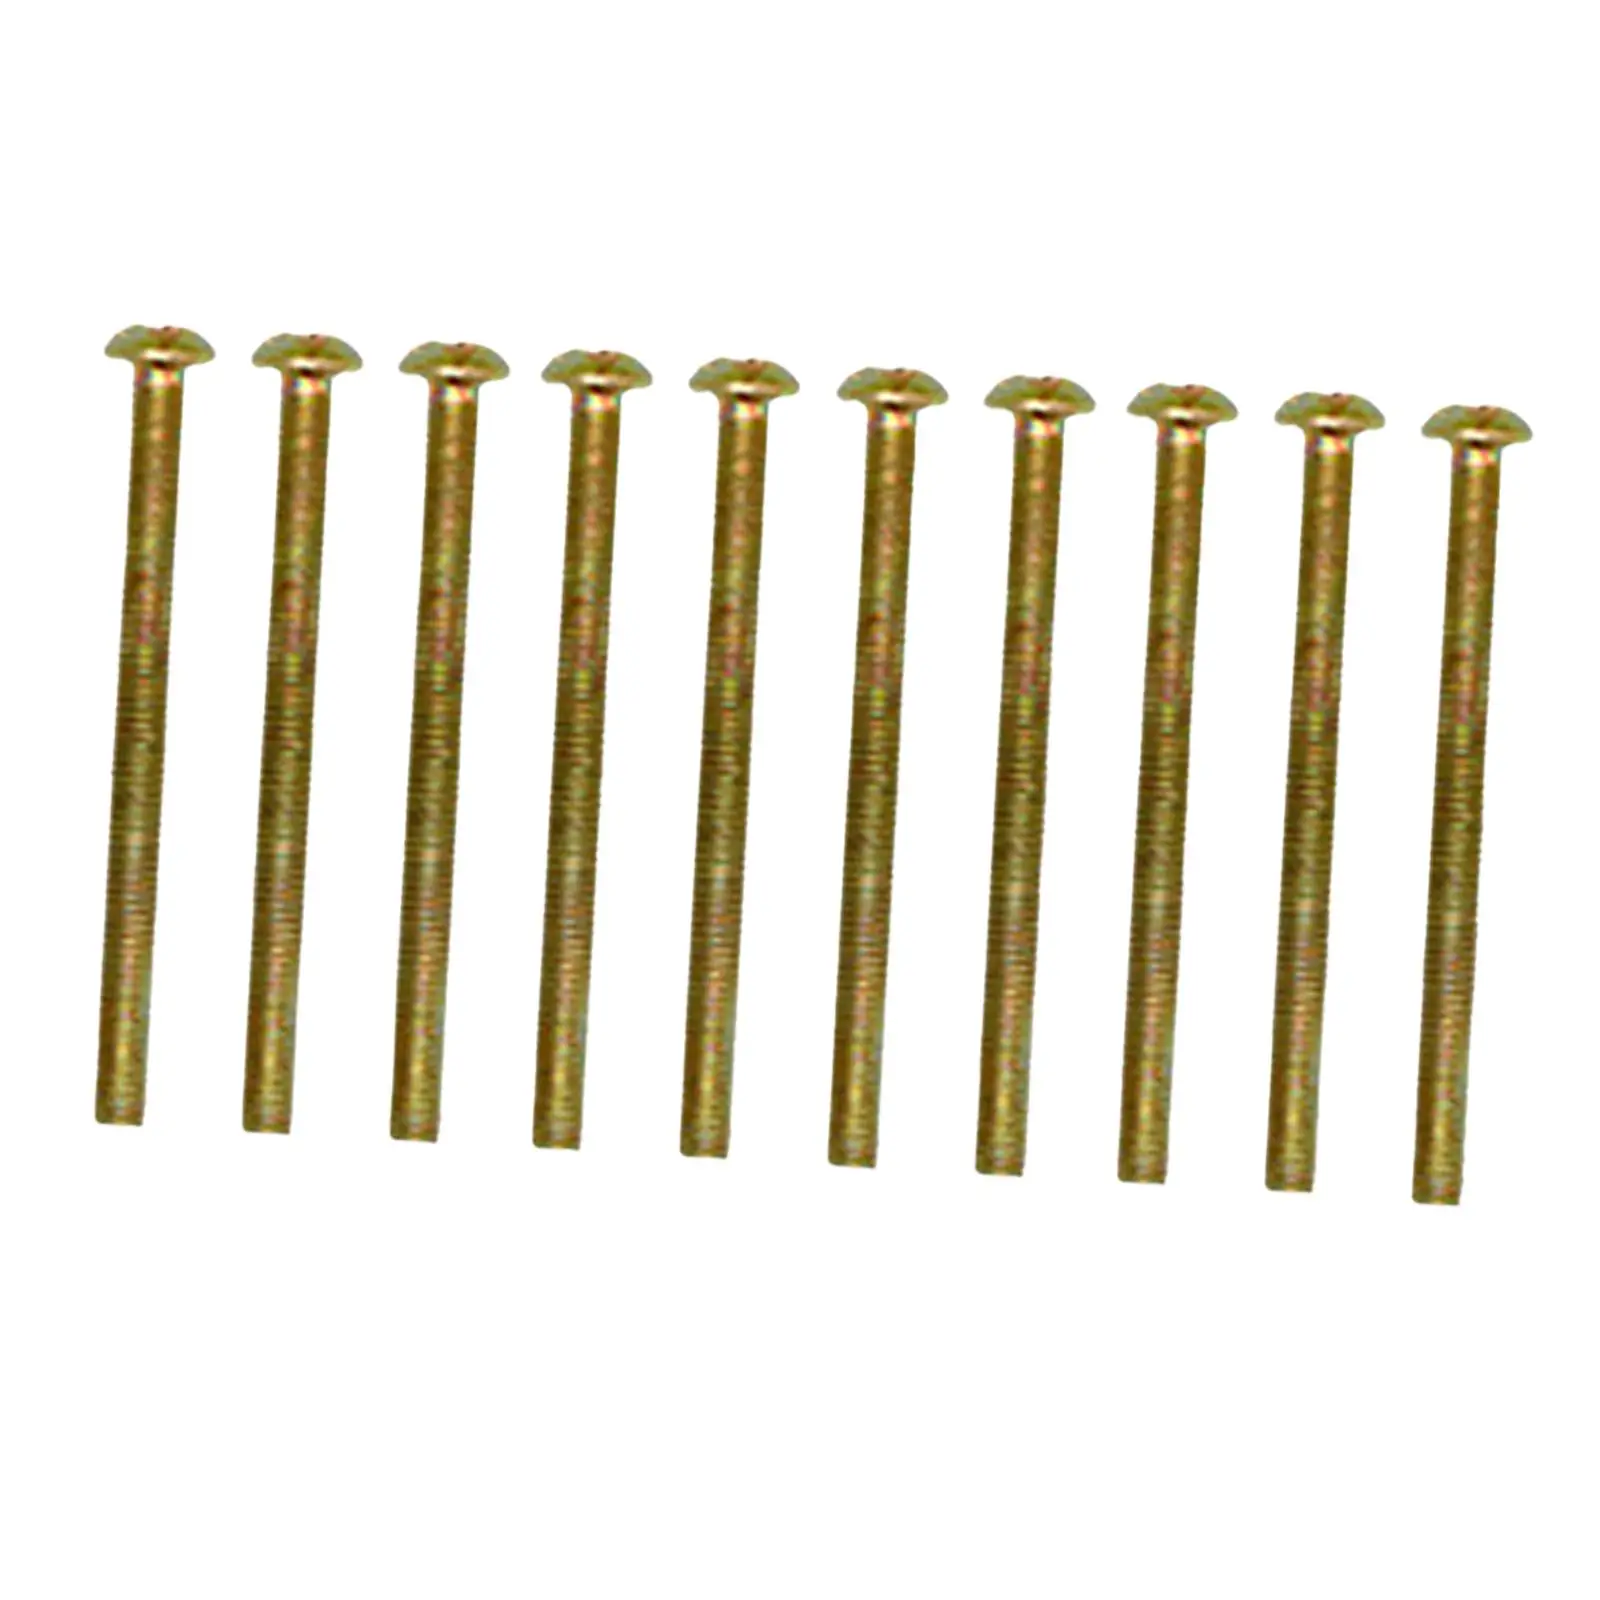 Cassette Screws Support Rod 86 Type Electrical Accessories for Wall Mount Switch Box